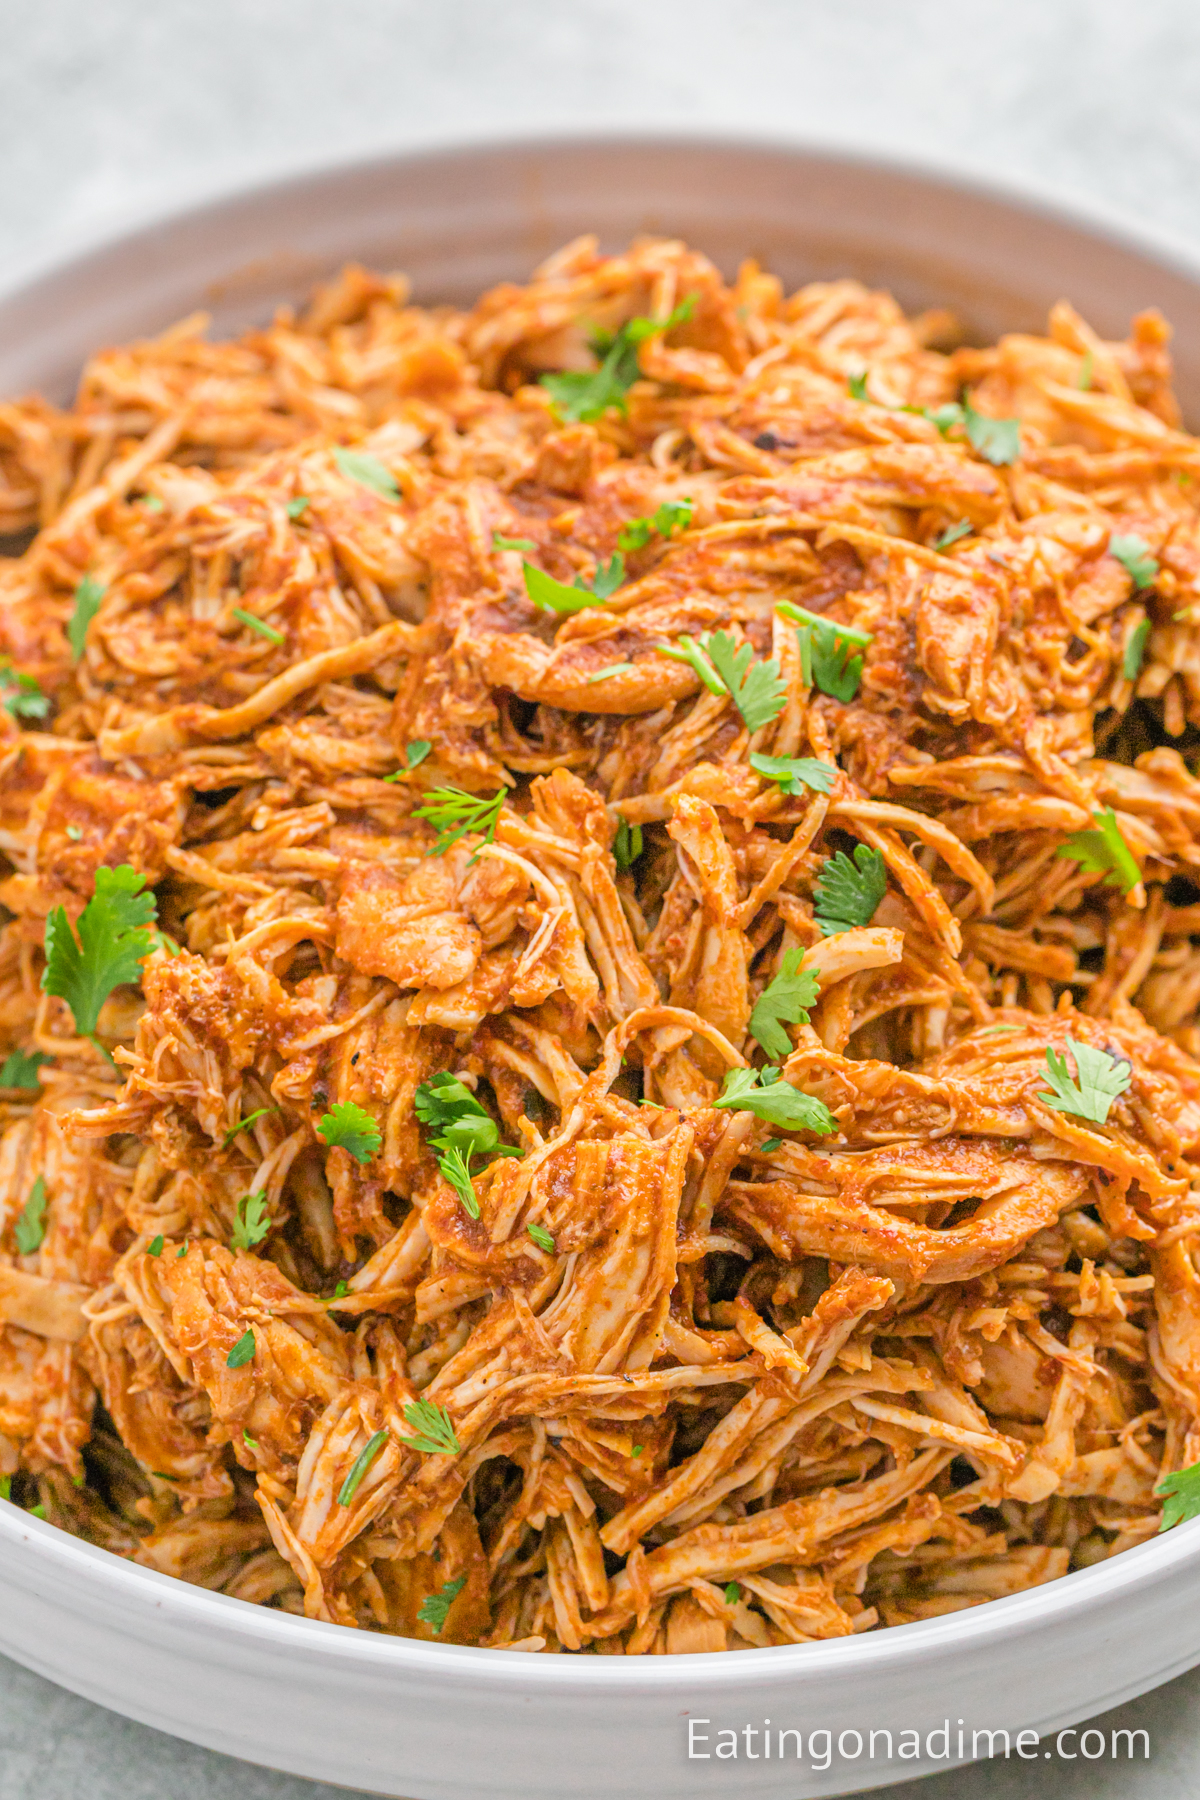 Chipotle shredded chicken topped with cilantro on a platter